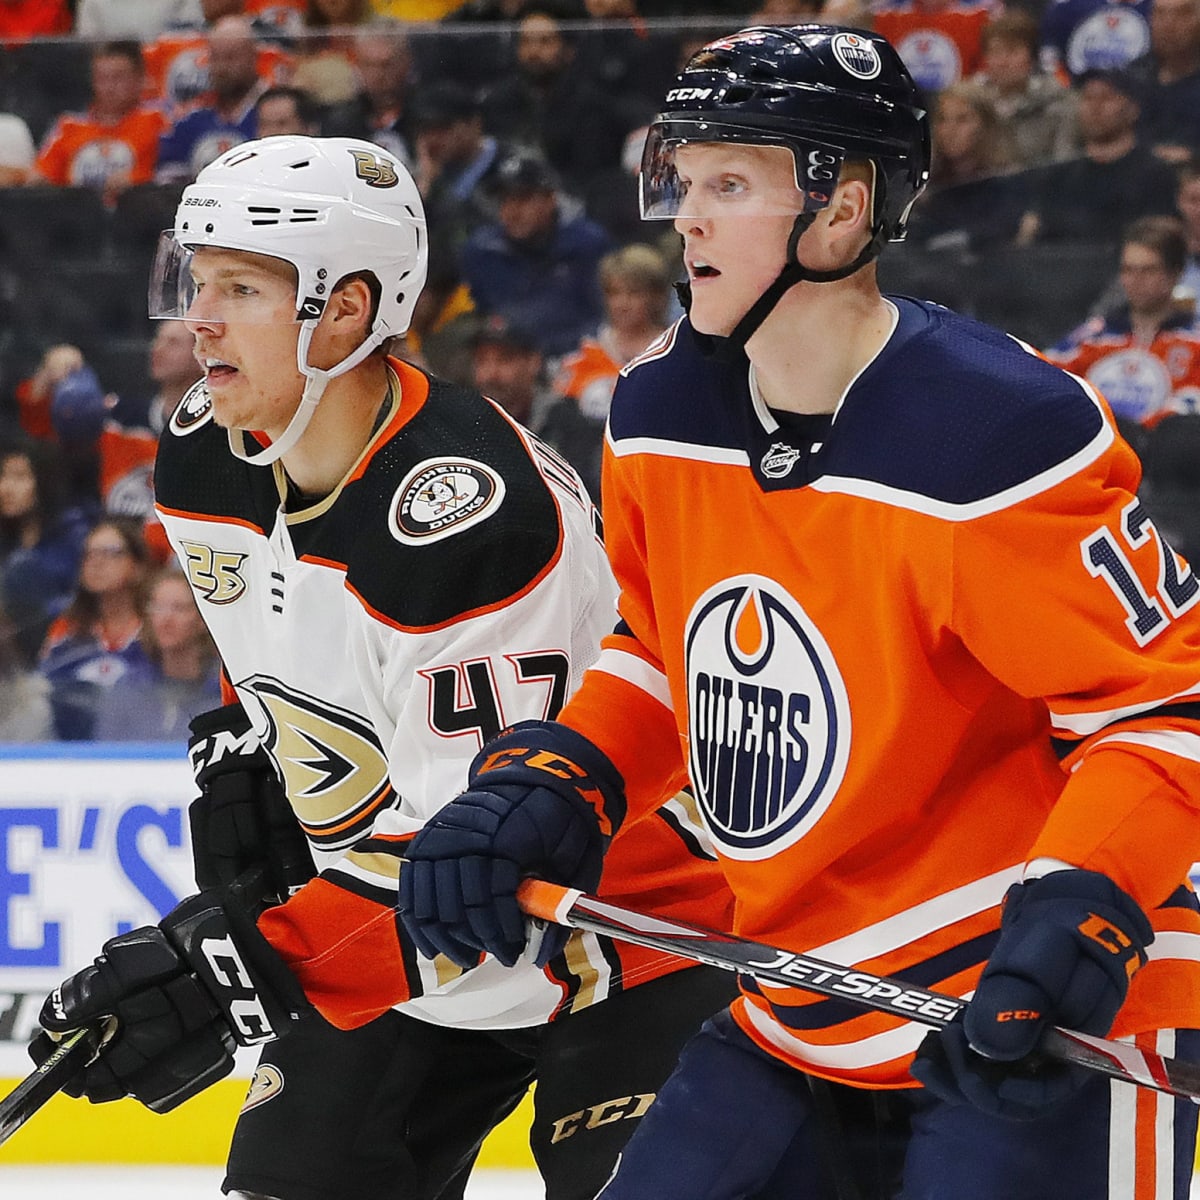 Oilers Player Colby Cave Dead at 25 After Suffering Brain Bleed